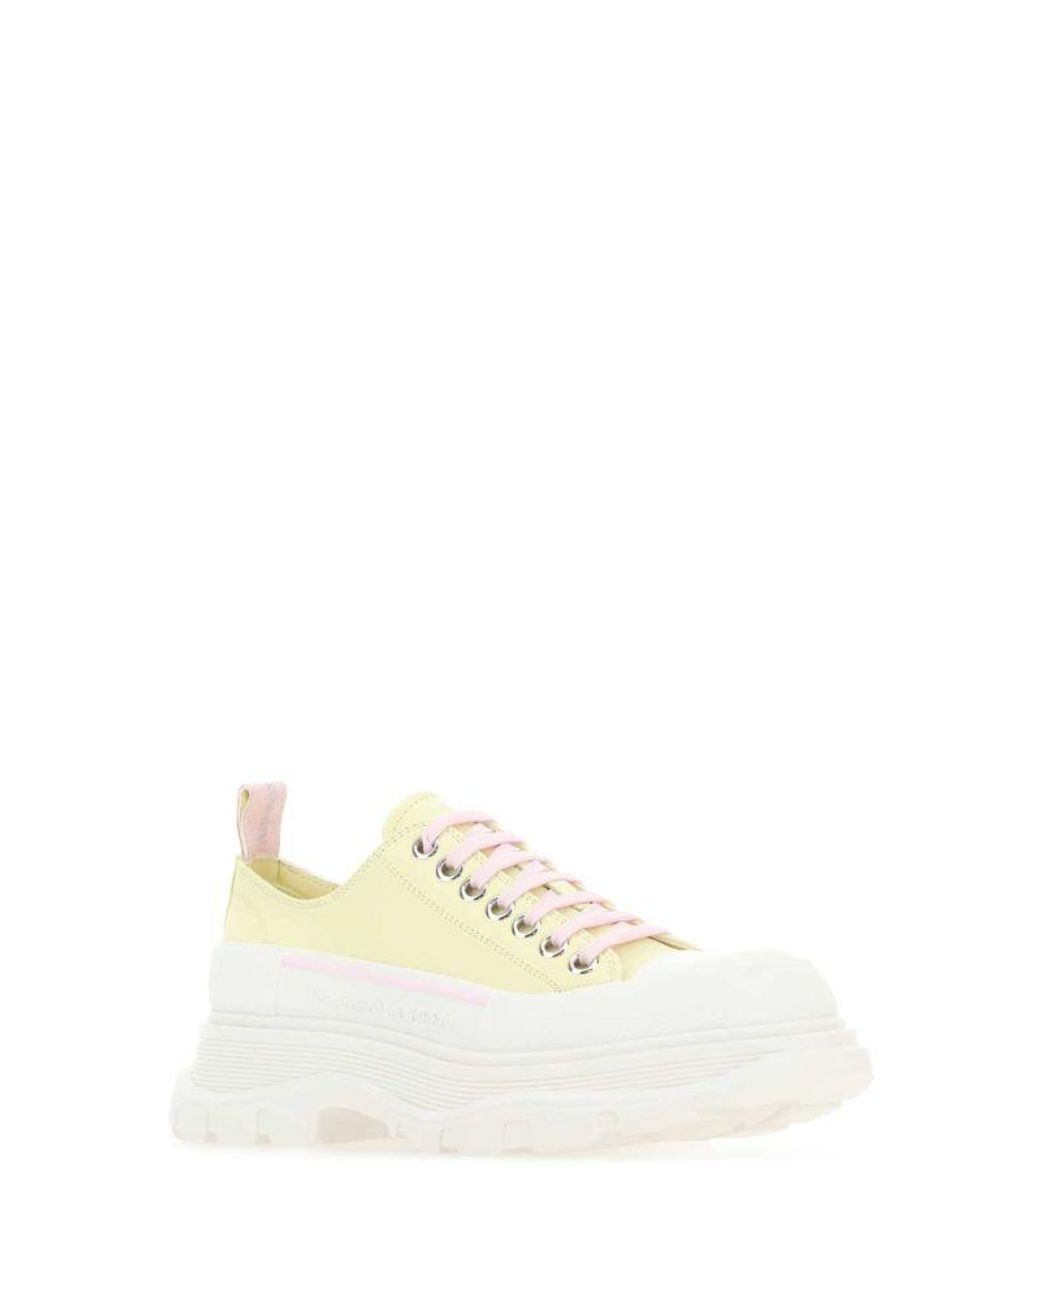 Alexander McQueen Multicolor Lace-up Shoes in White | Lyst